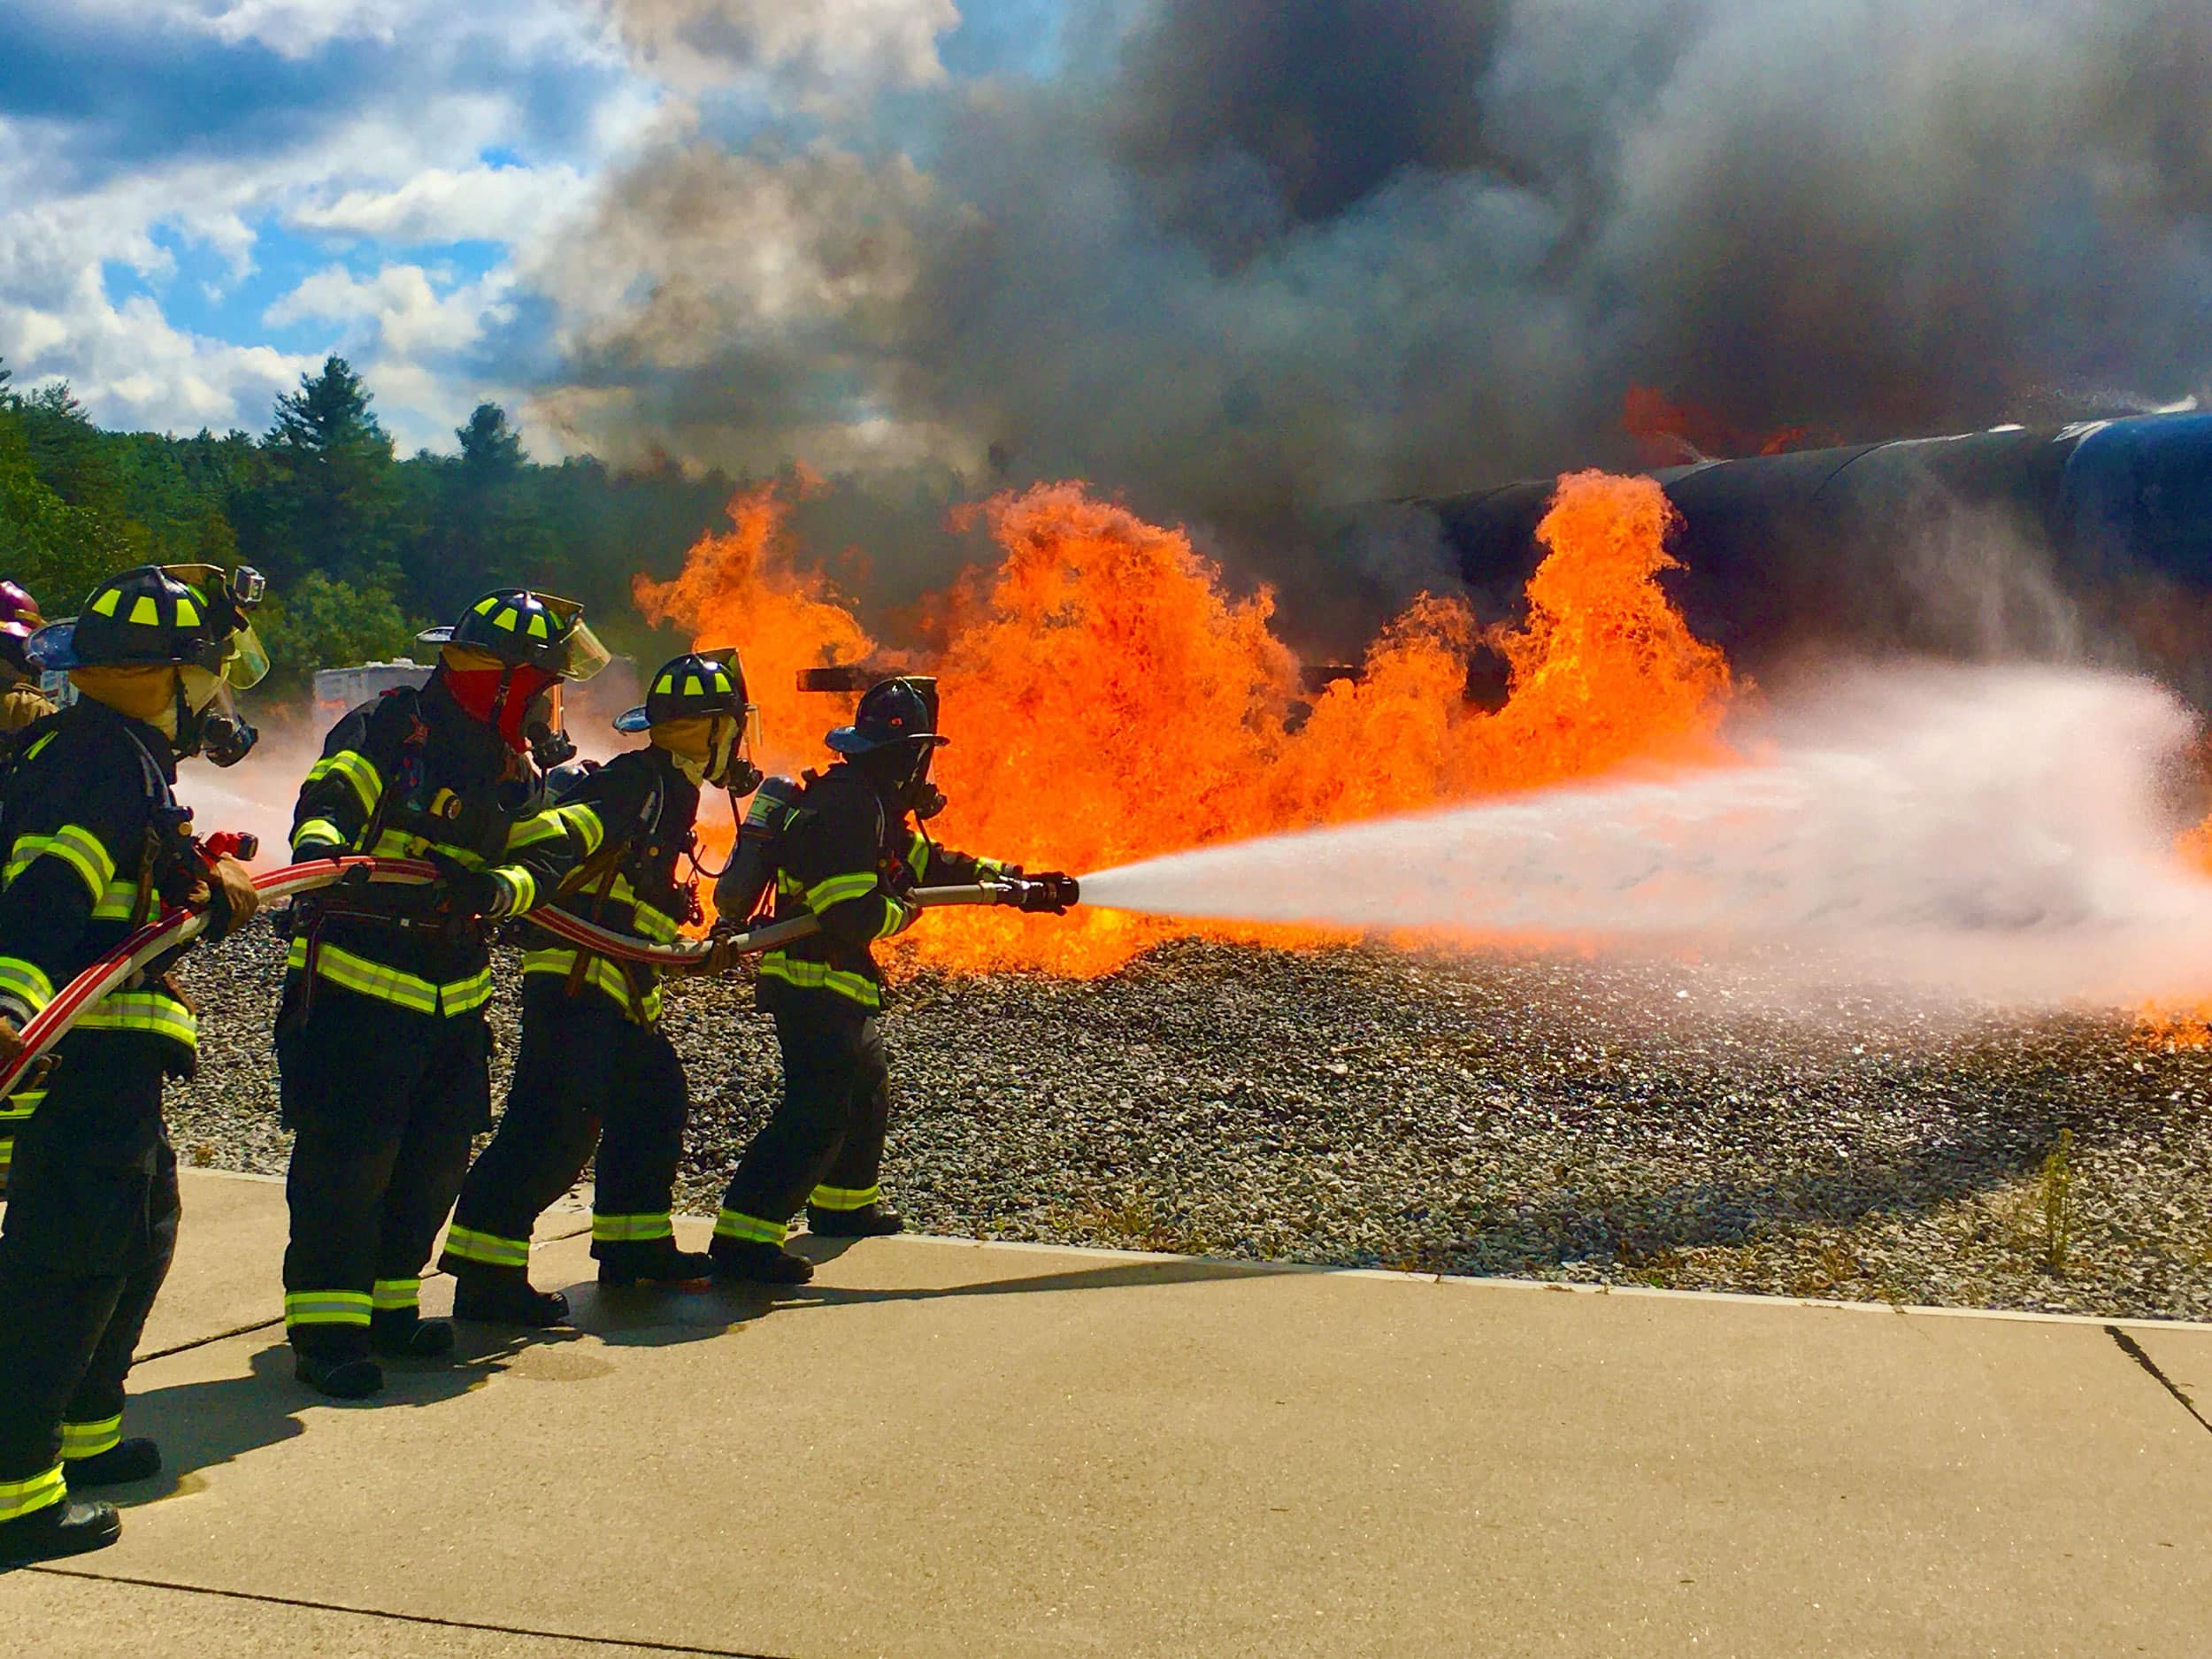 Firefighters extinguishing a large fire during training at PVD Airport